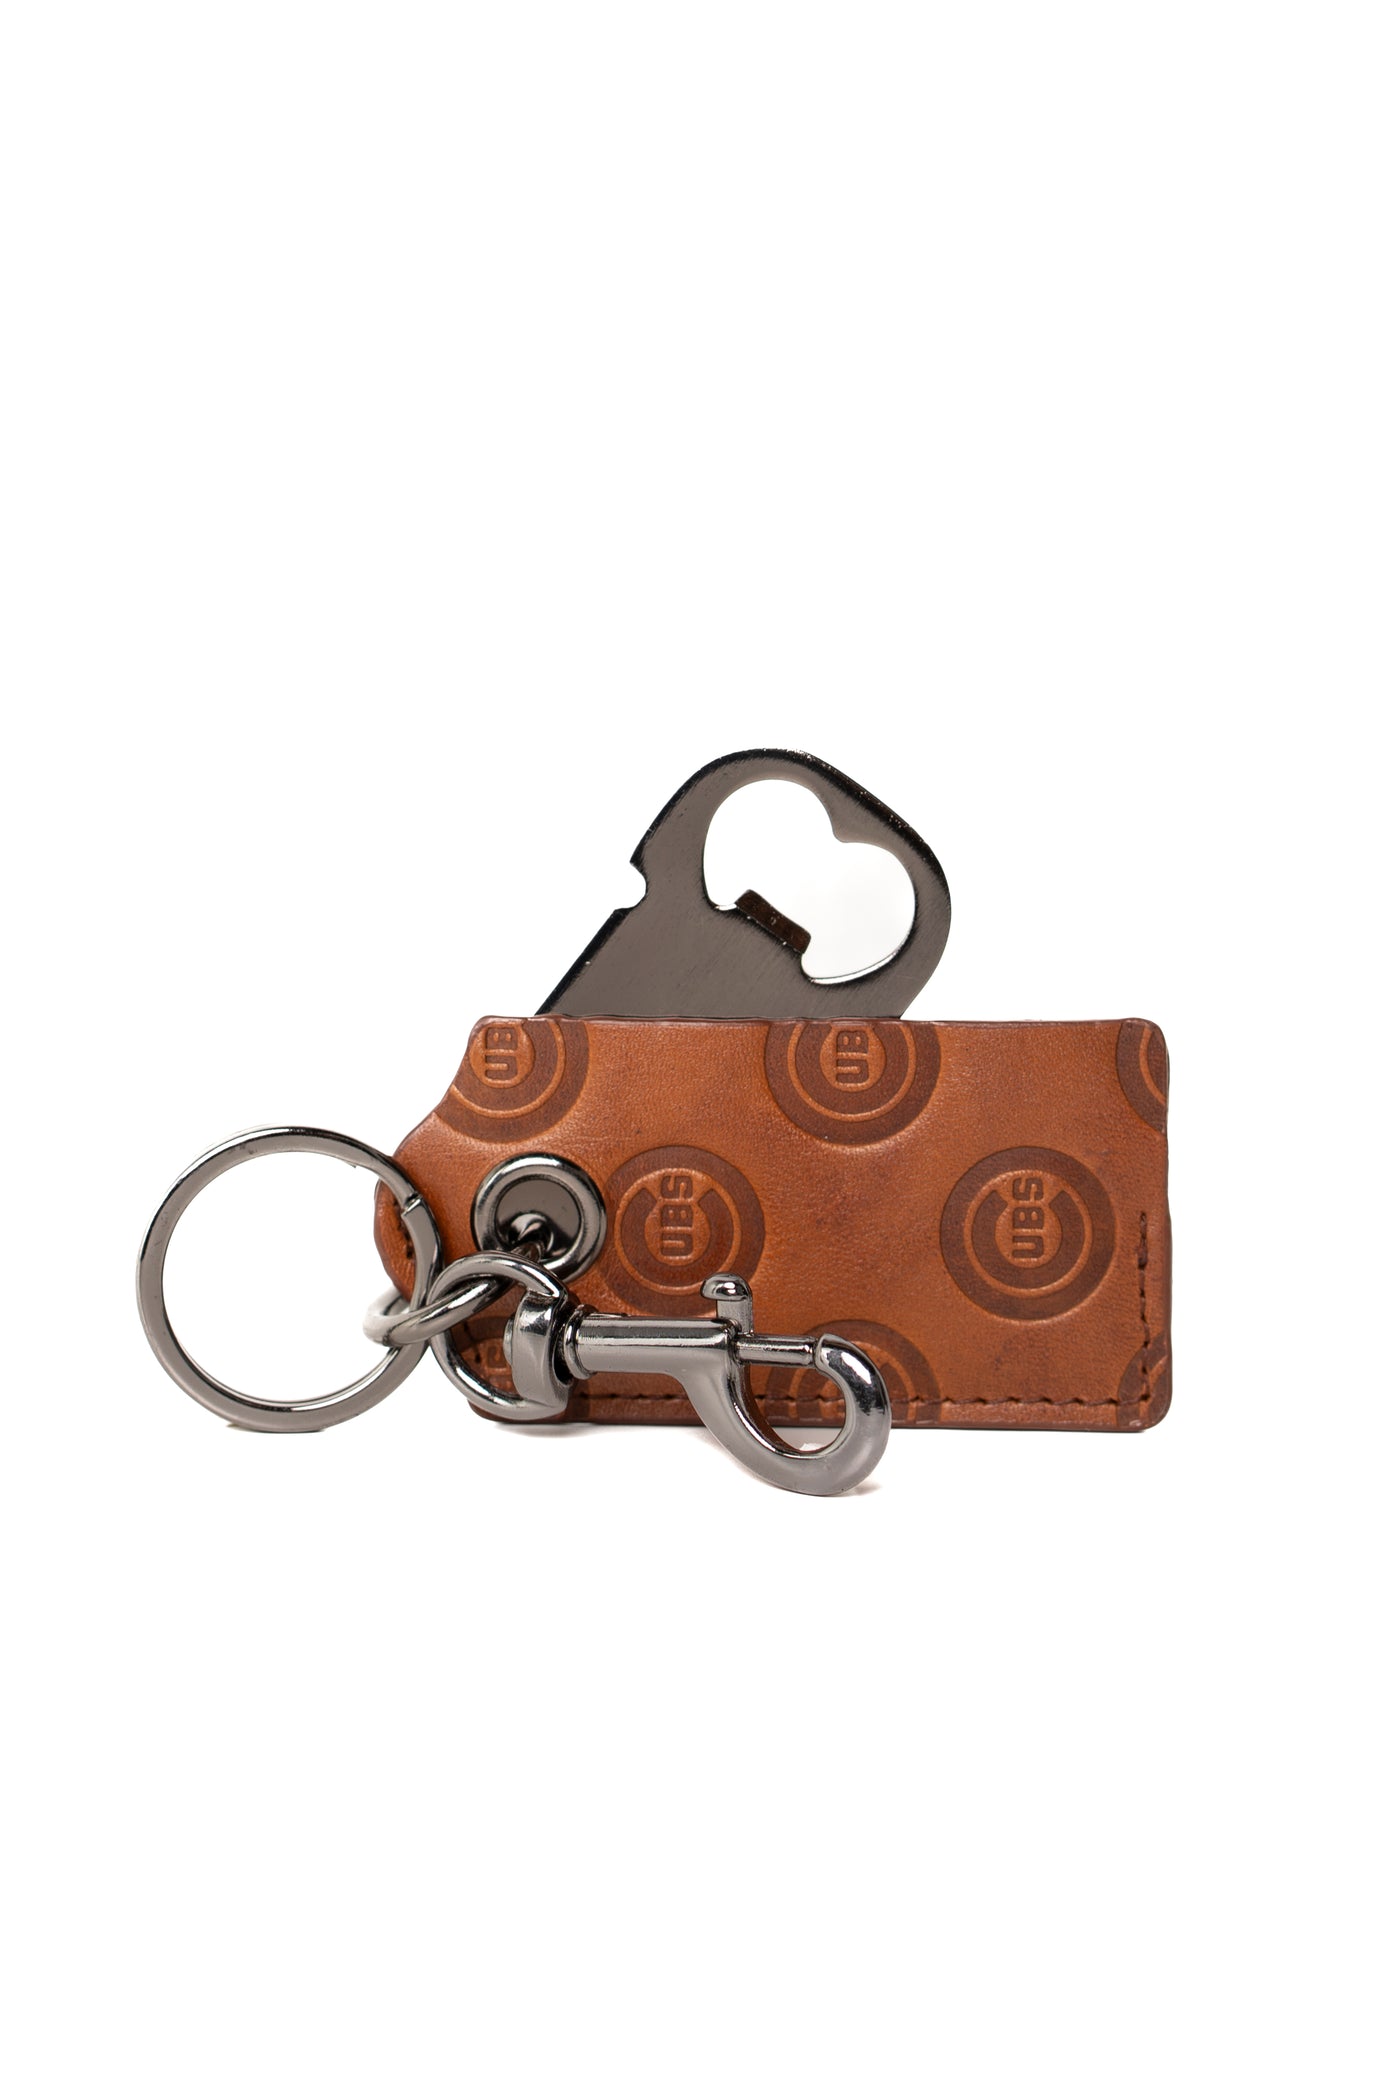 CHICAGO CUBS LUSSO C LOGO COGNAC LEATHER BOTTLE OPENER KEYCHAIN